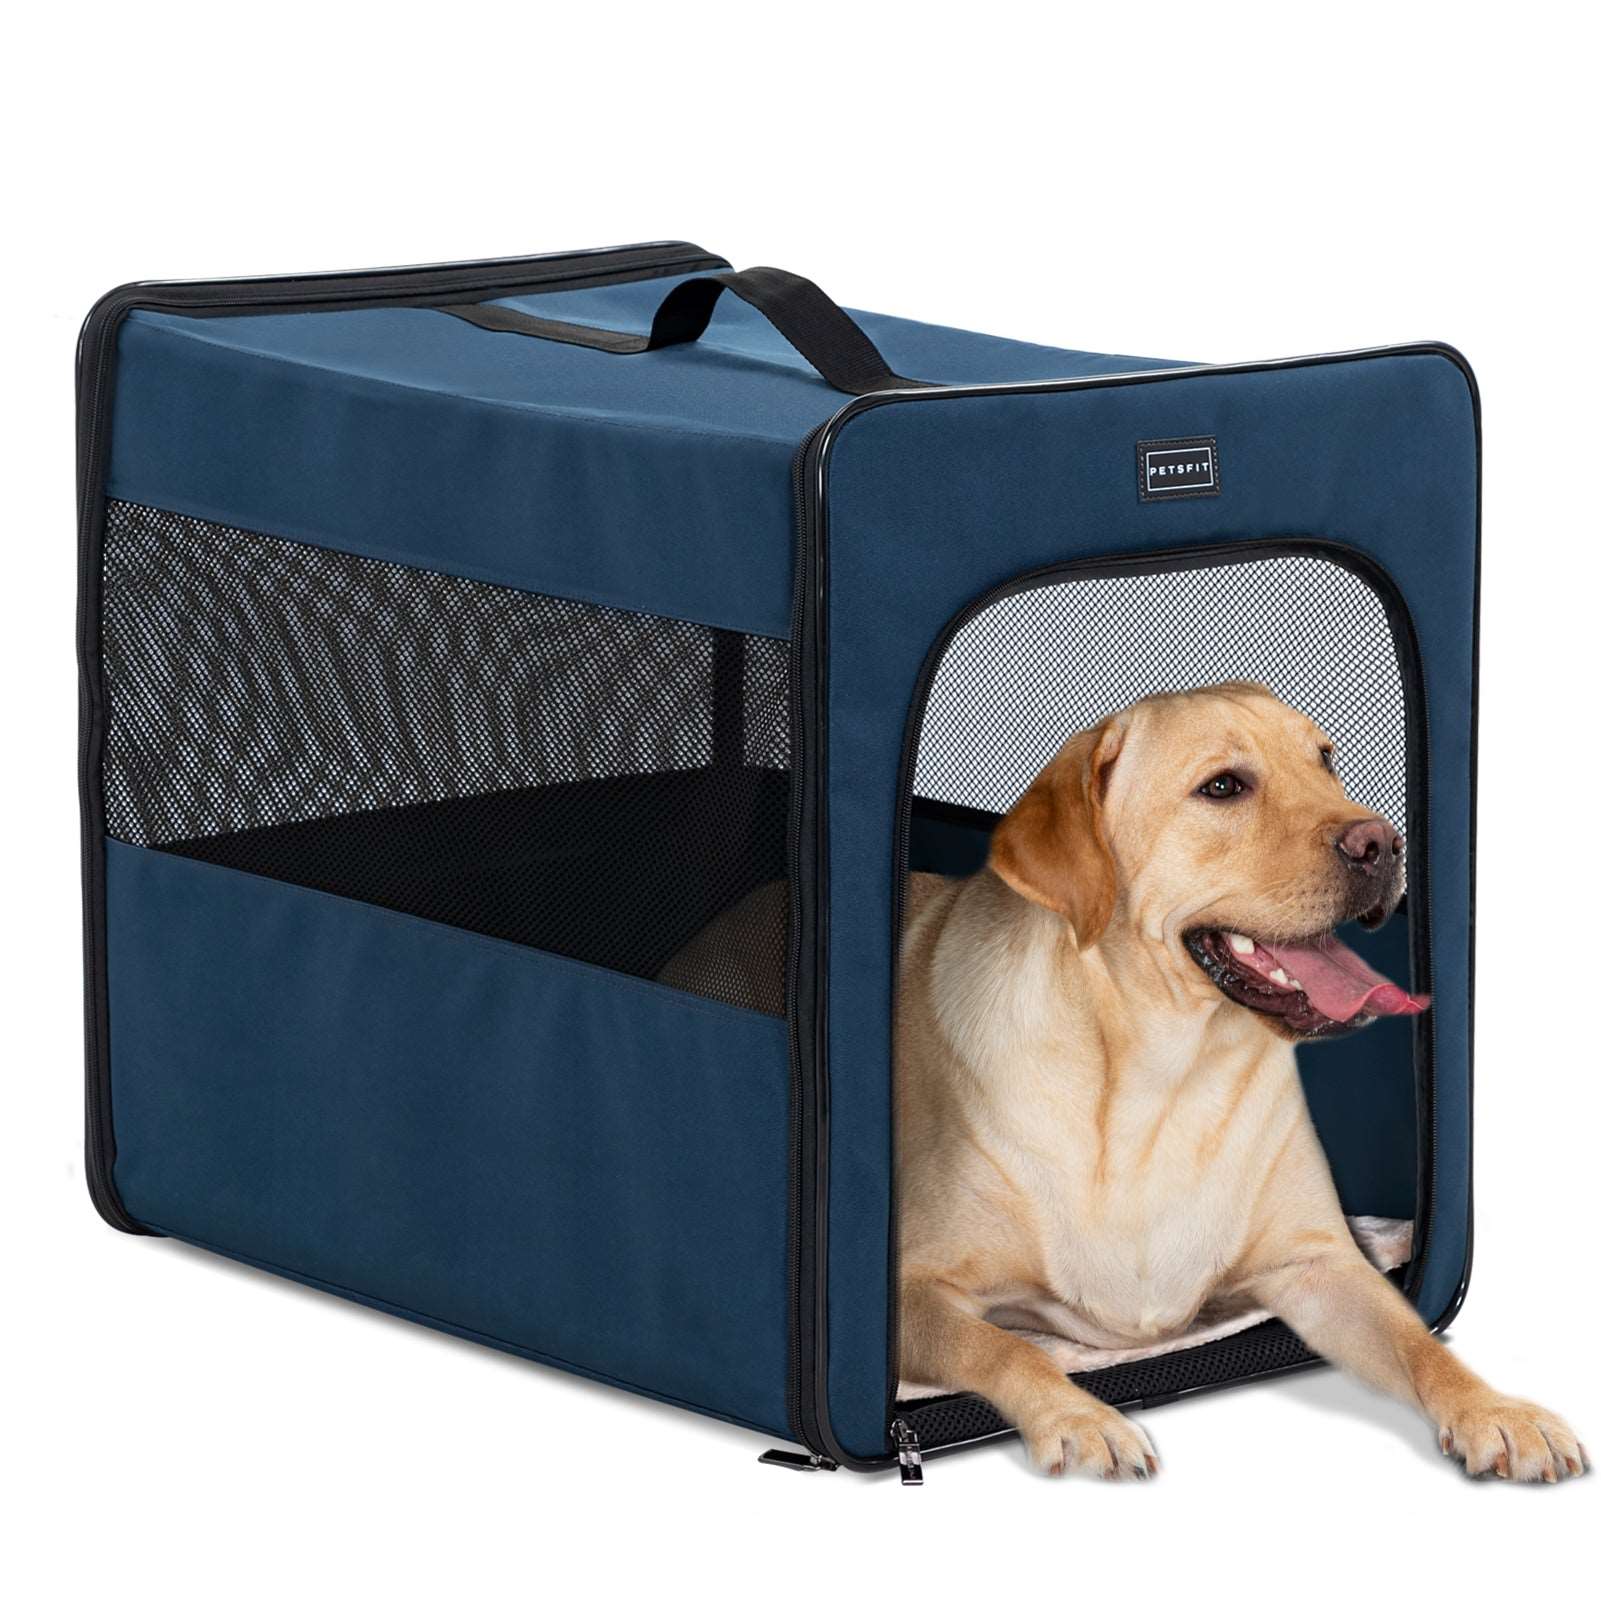 Petsfit-Portable-Dog-Crate-24-Inch-12